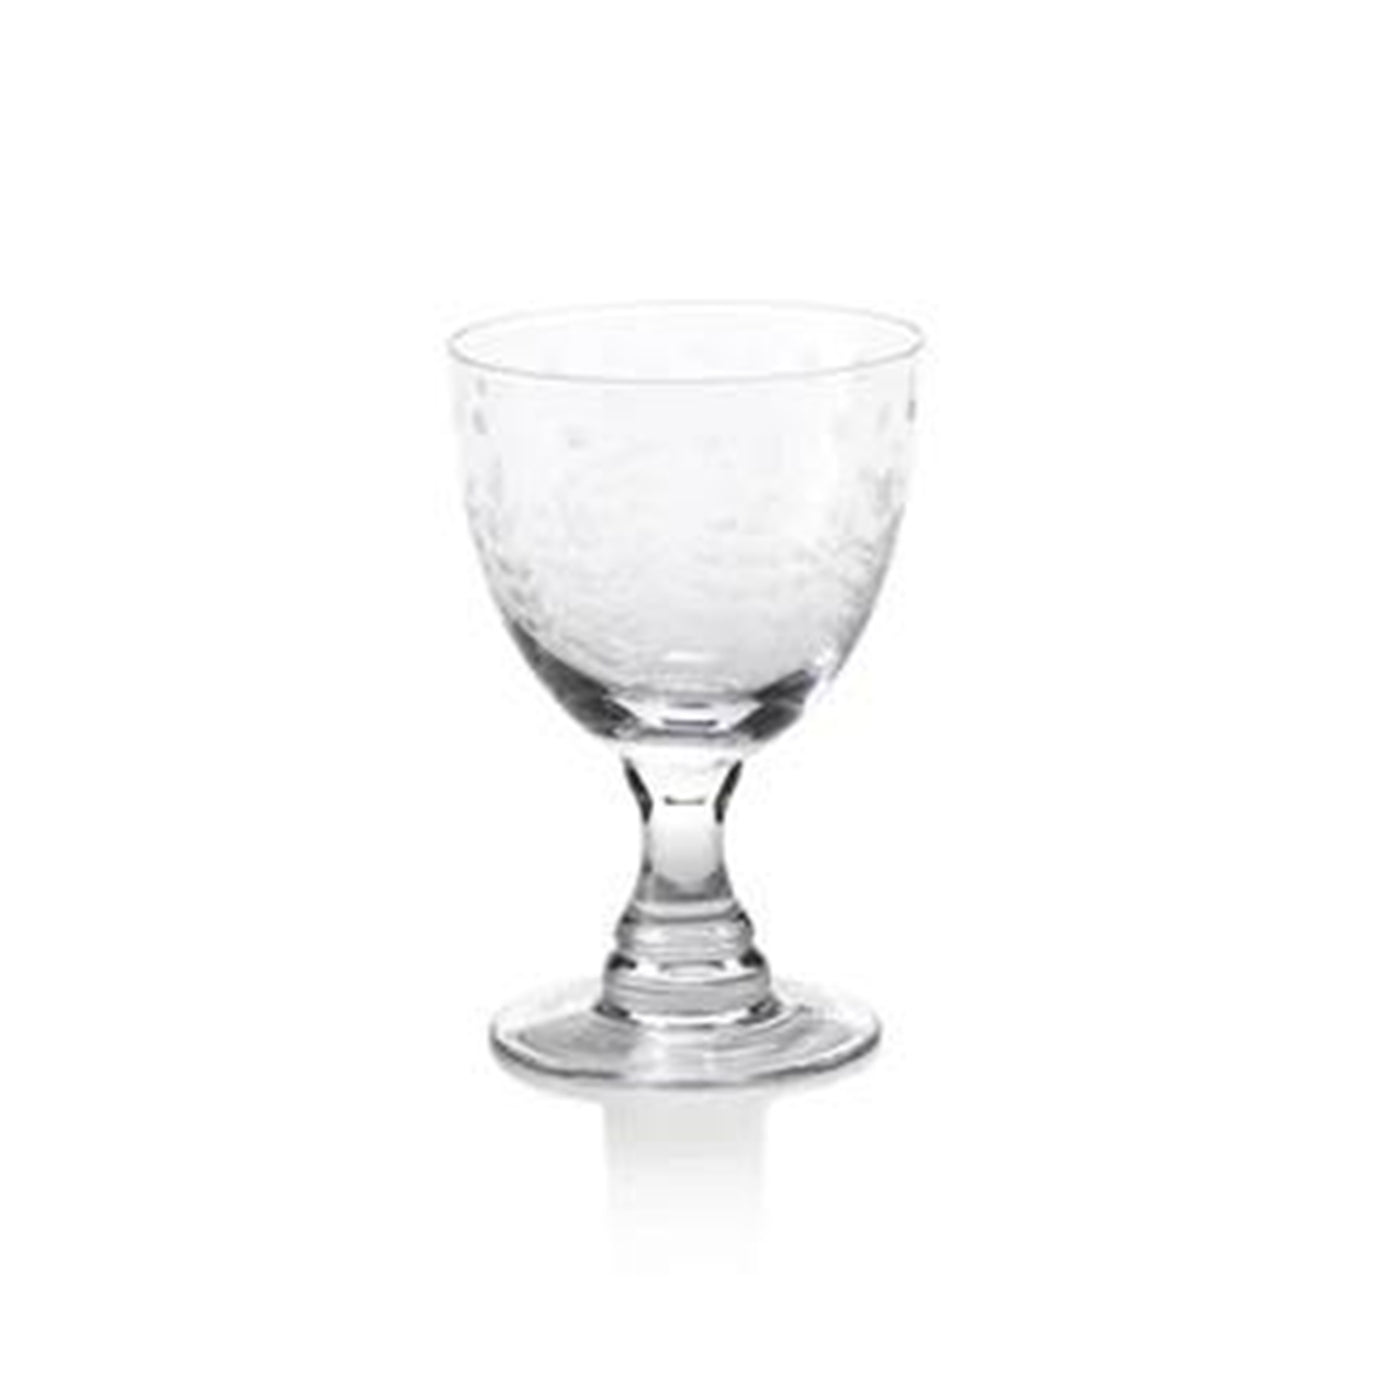 Spring Leaves Cut Design Red Wine Glass  - Cannot Ship